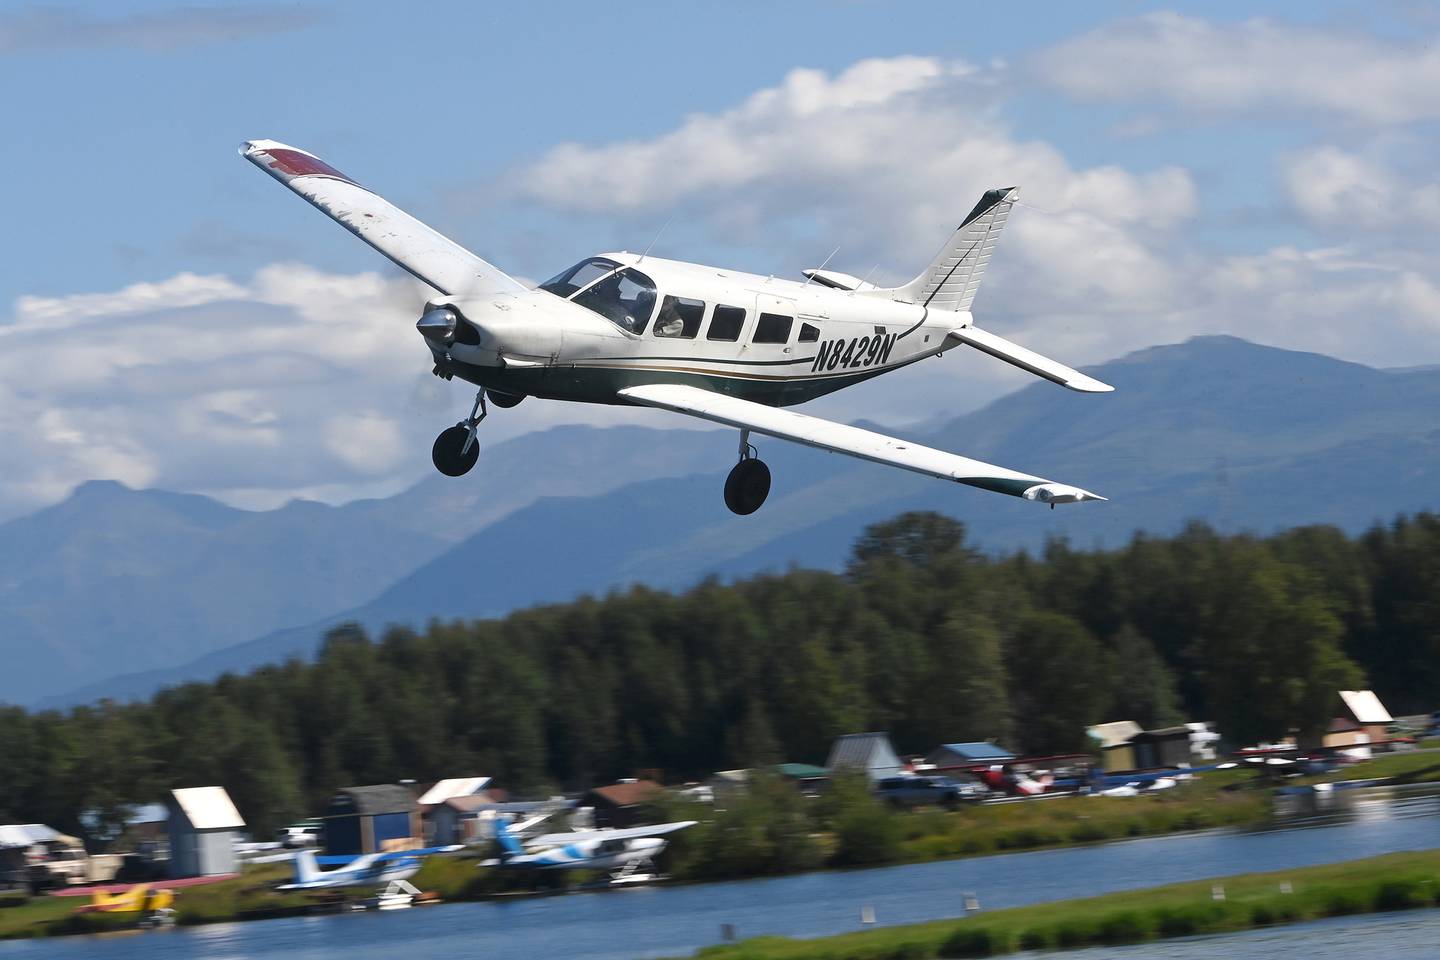 Alaska Aviation Museum's 21st annual Fly-By Festival at Lake Hood Seaplane Base